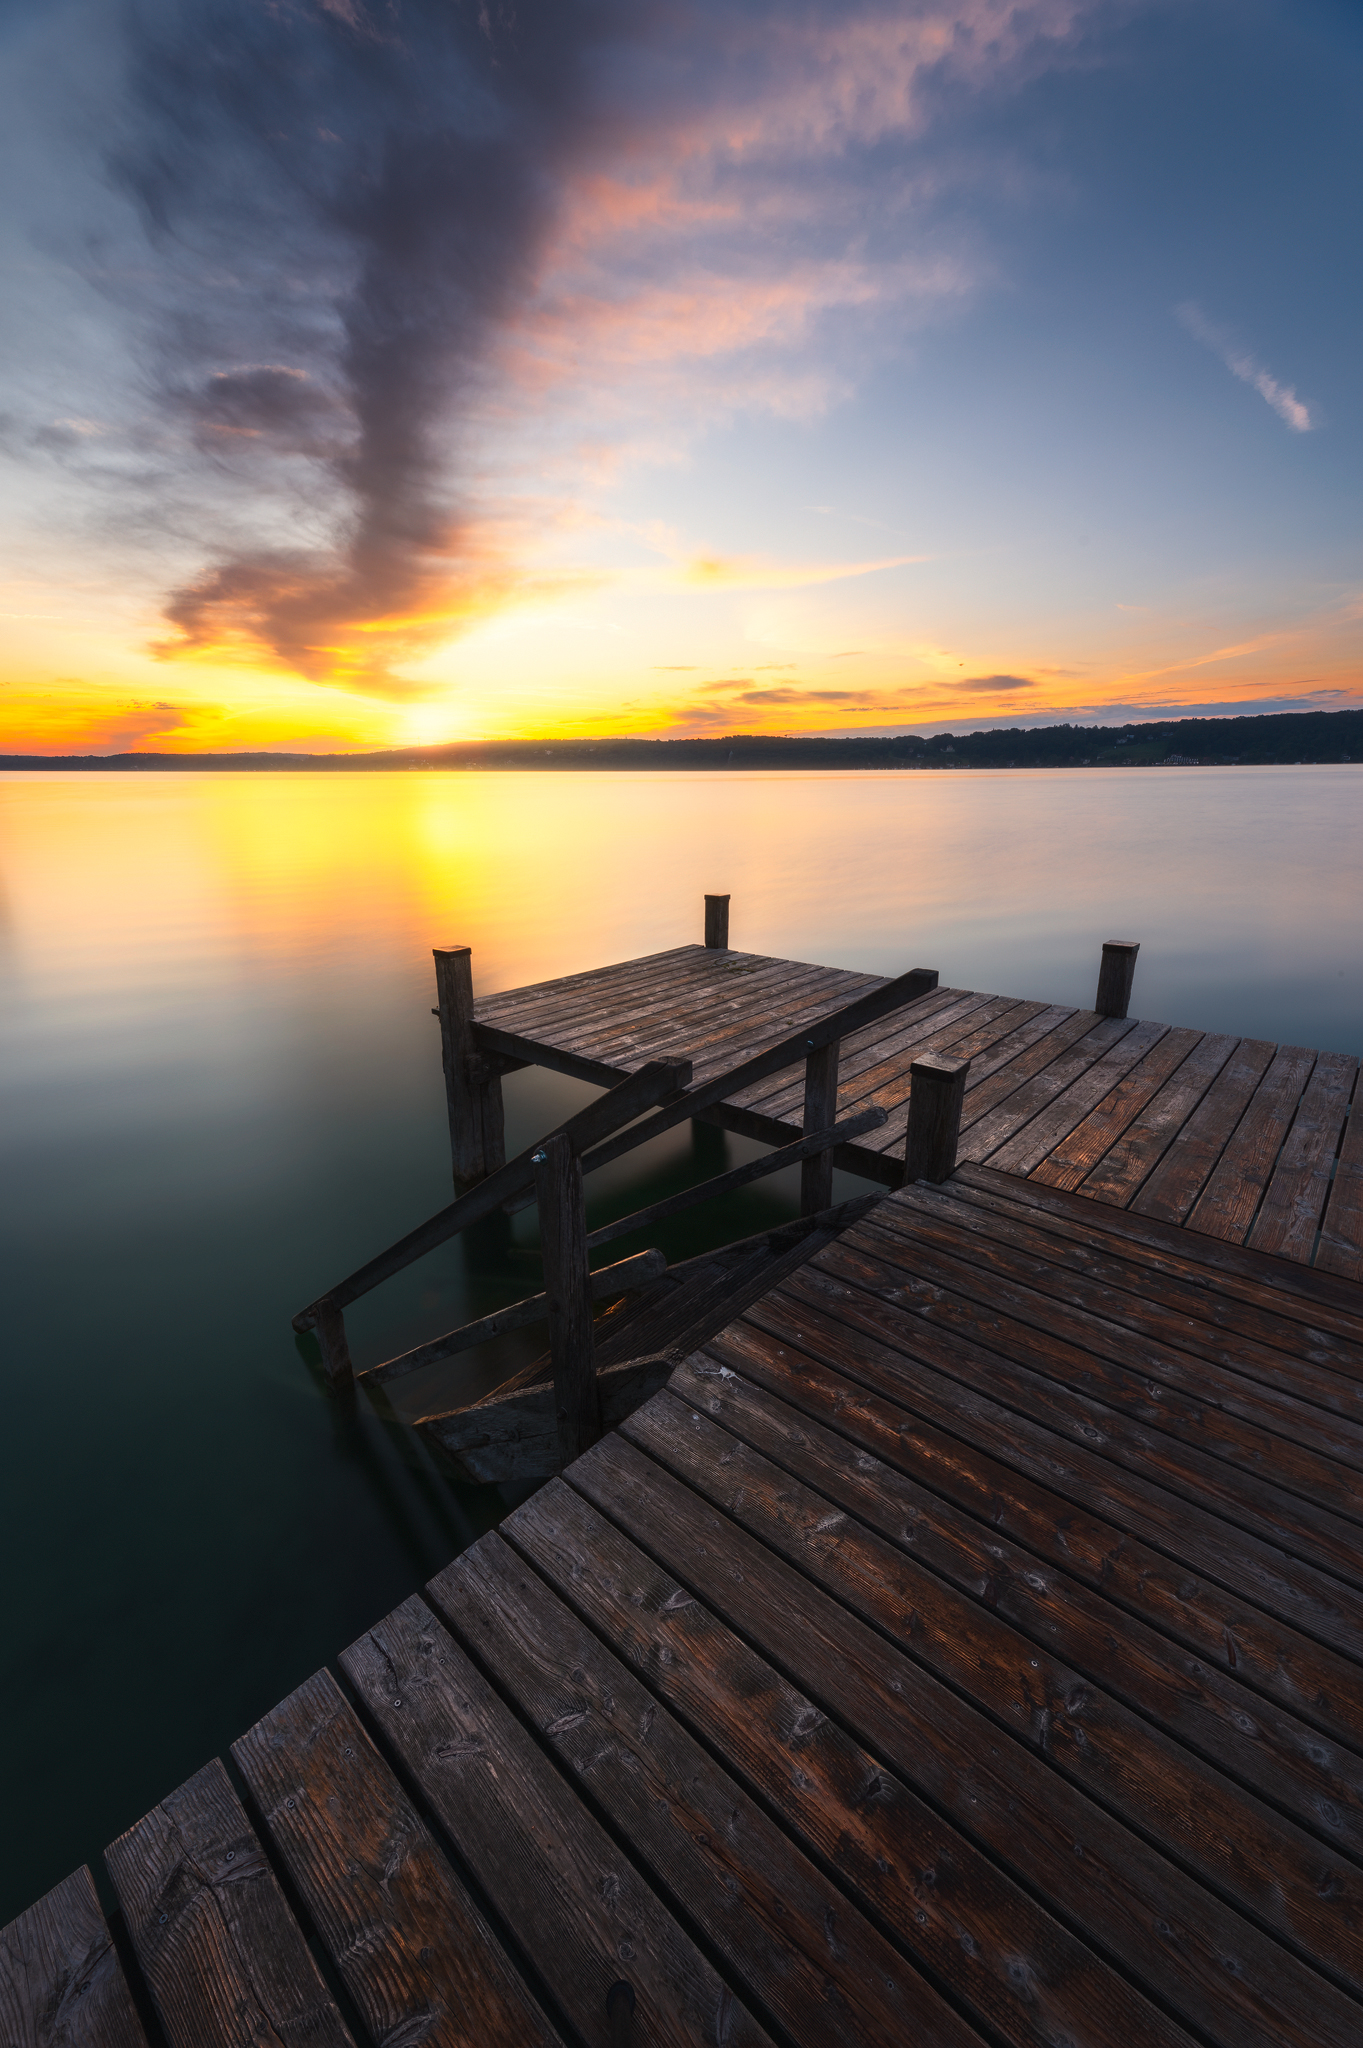 A jetty on the Starnberger See...